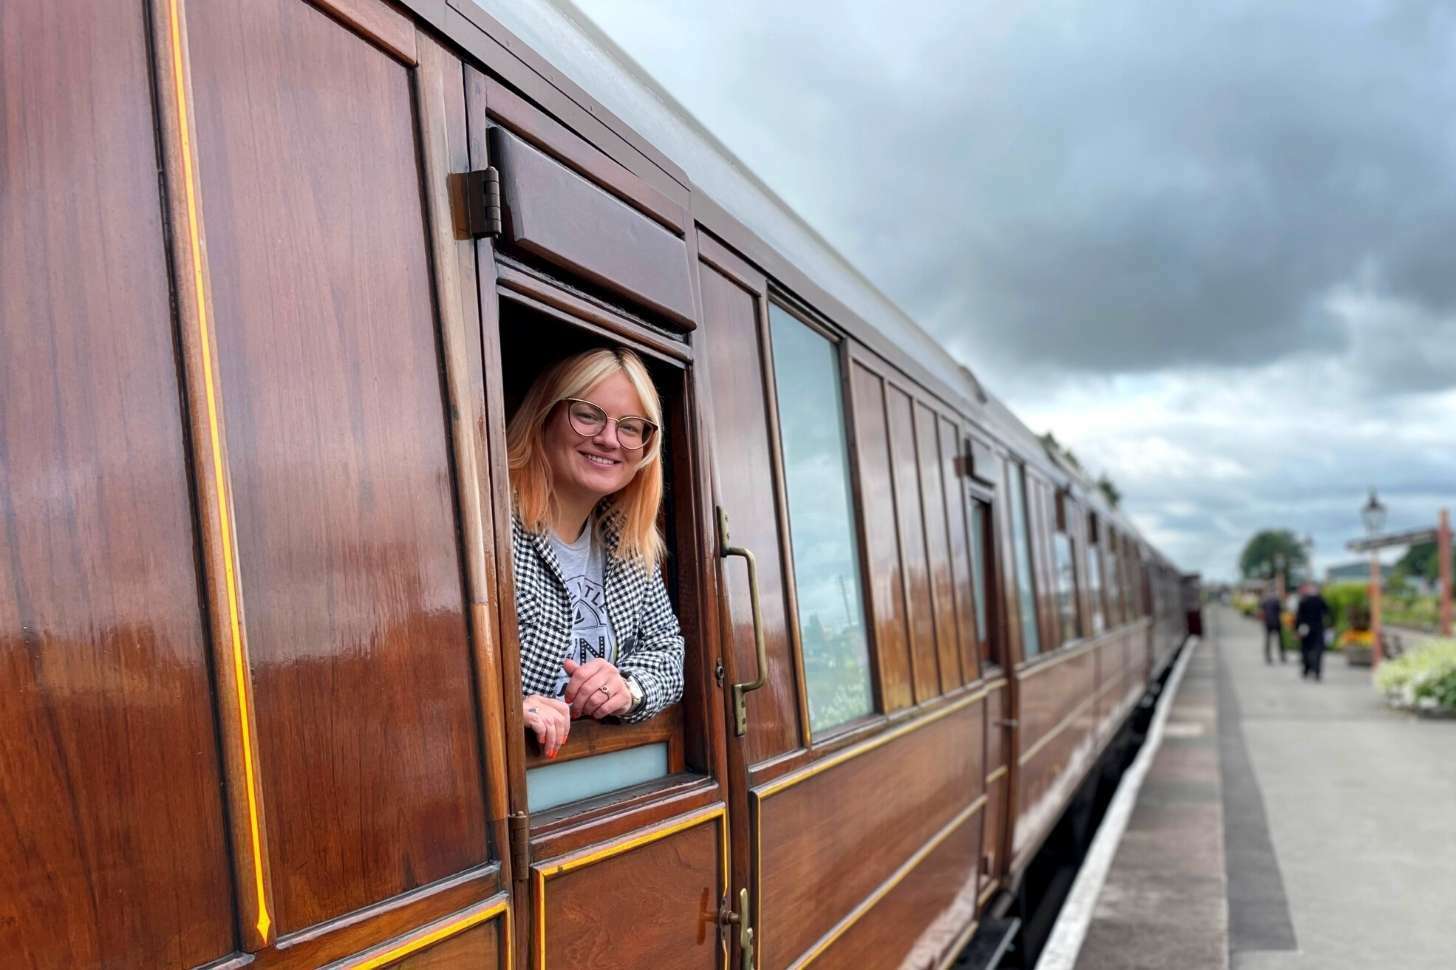 Kelly from Little Gin and Rum Co onboard the gin train